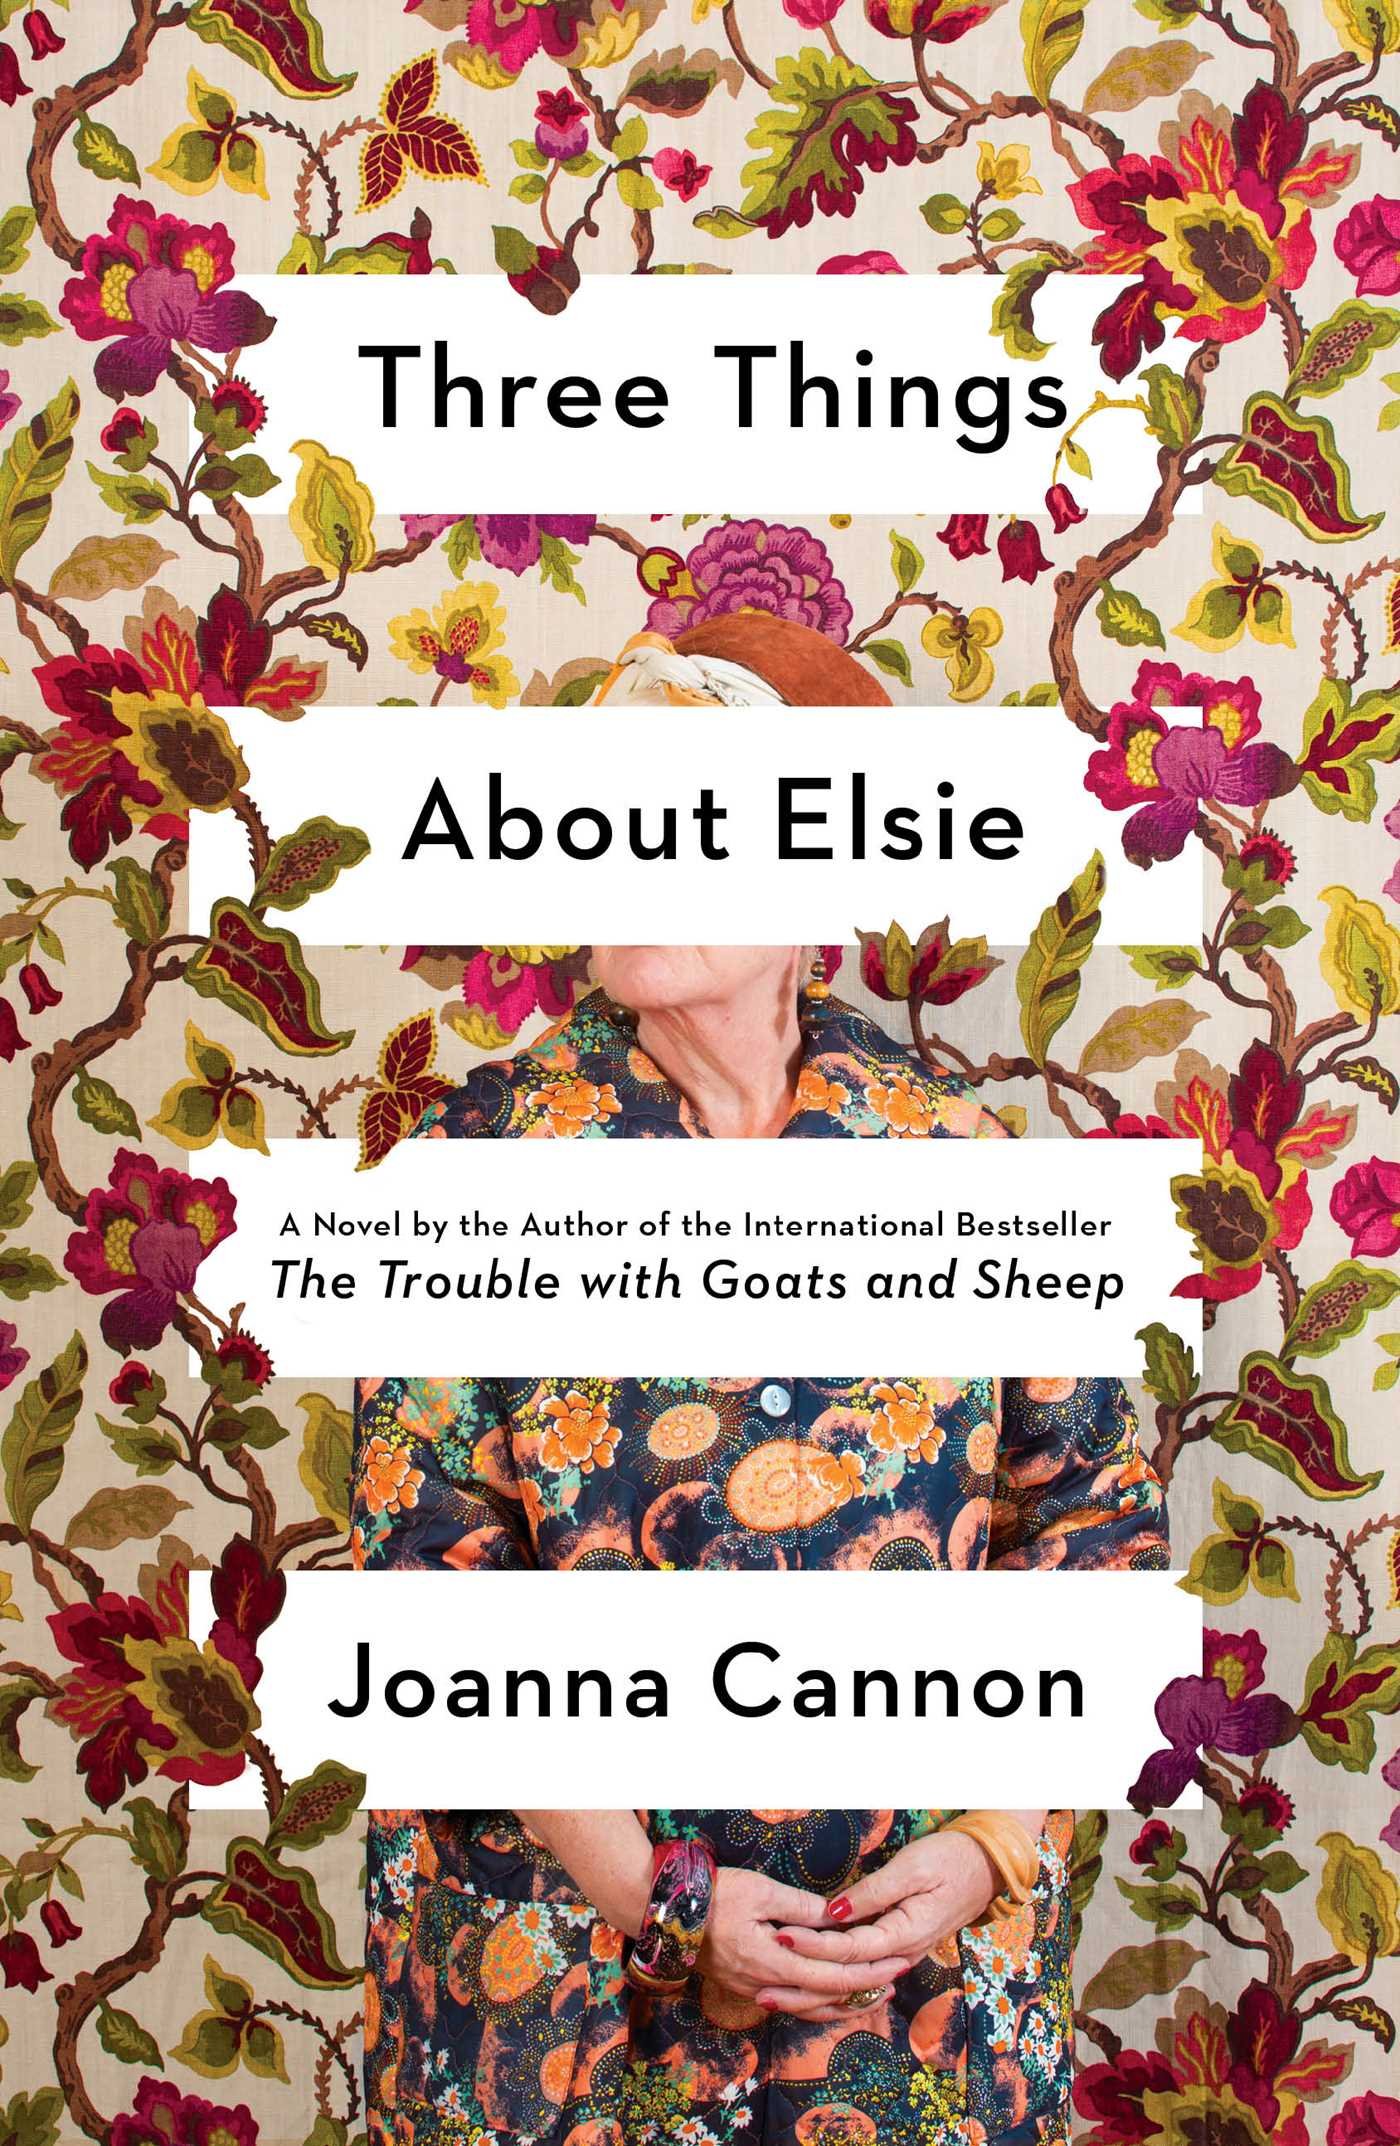 Three Things About Elsie, Joanna Cannon